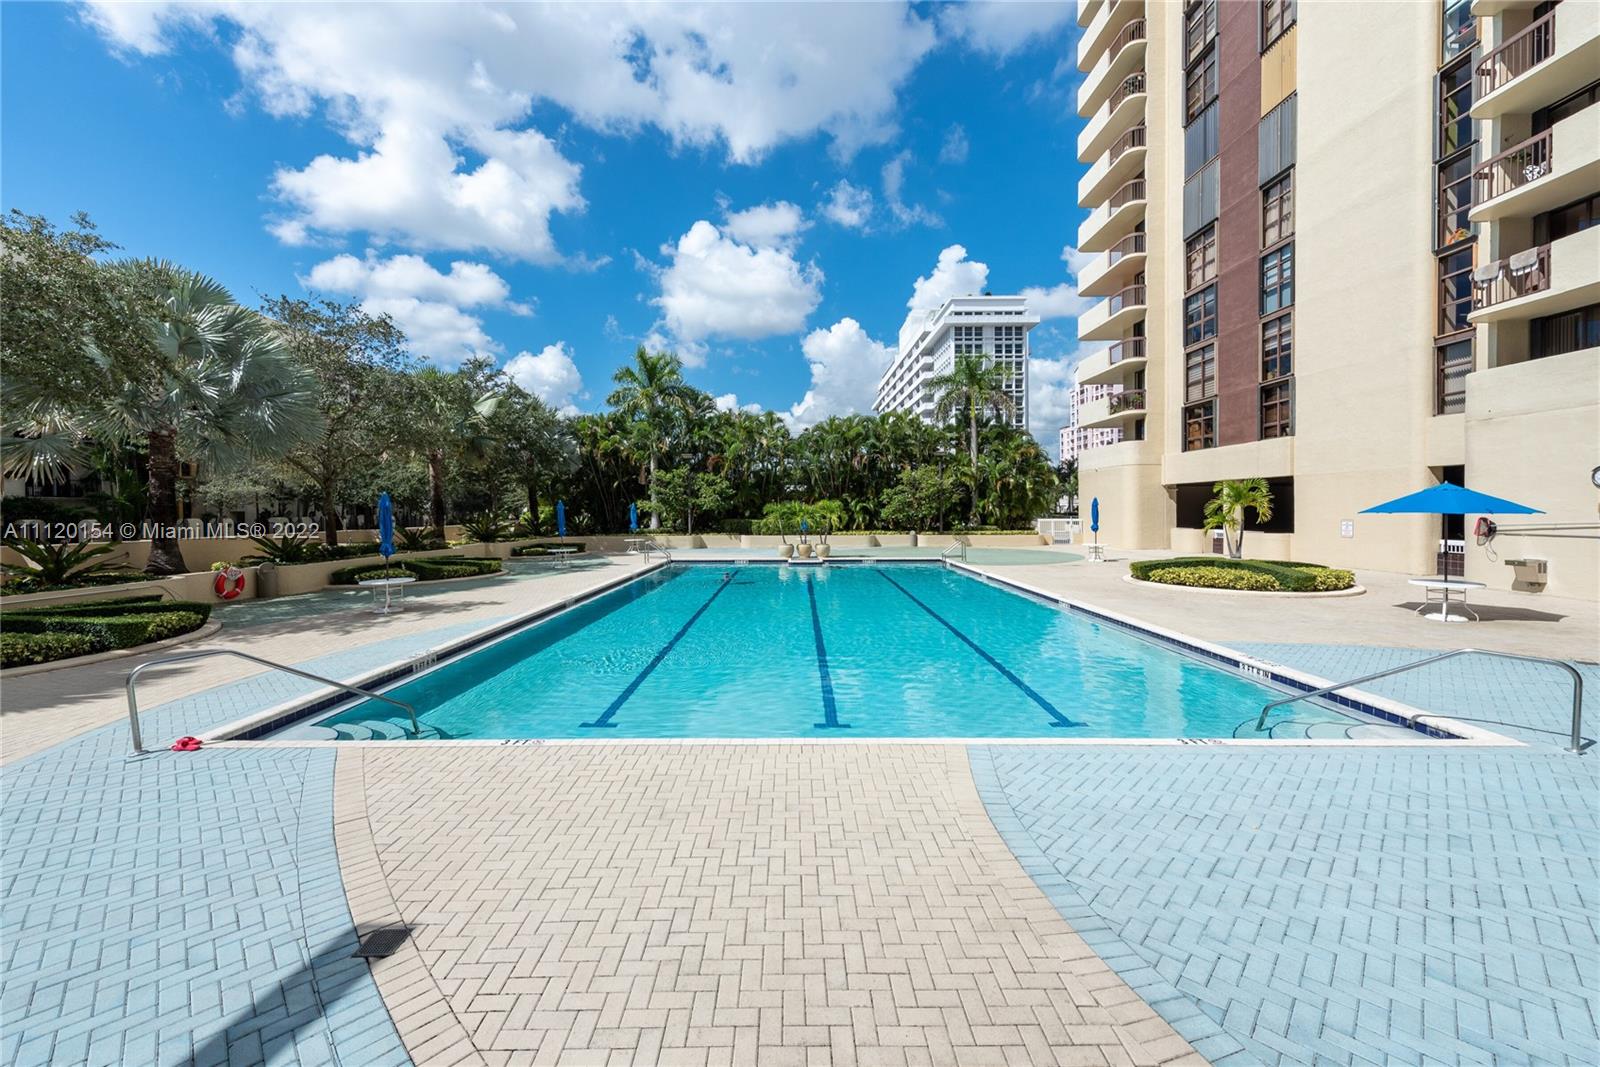 New Listing! 2 bedroom/ 2.5 bathroom condo with 1,423 sq. ft. Updated kitchen. Split floor plan. The Master has a walk-in closet, large shower, and separate tub in the master bath. Tile flooring. Expansive balcony with stunning views of the Biltmore Hotel, Coconut Grove down to Dadeland. Washer/dryer in unit. 1 parking space with plenty of visitor parking. Within walking distance to Downtown Coral Gables. 600 Biltmore Way has many amenities such as 24-hour security, a community pool, a card room, and an exercise room.